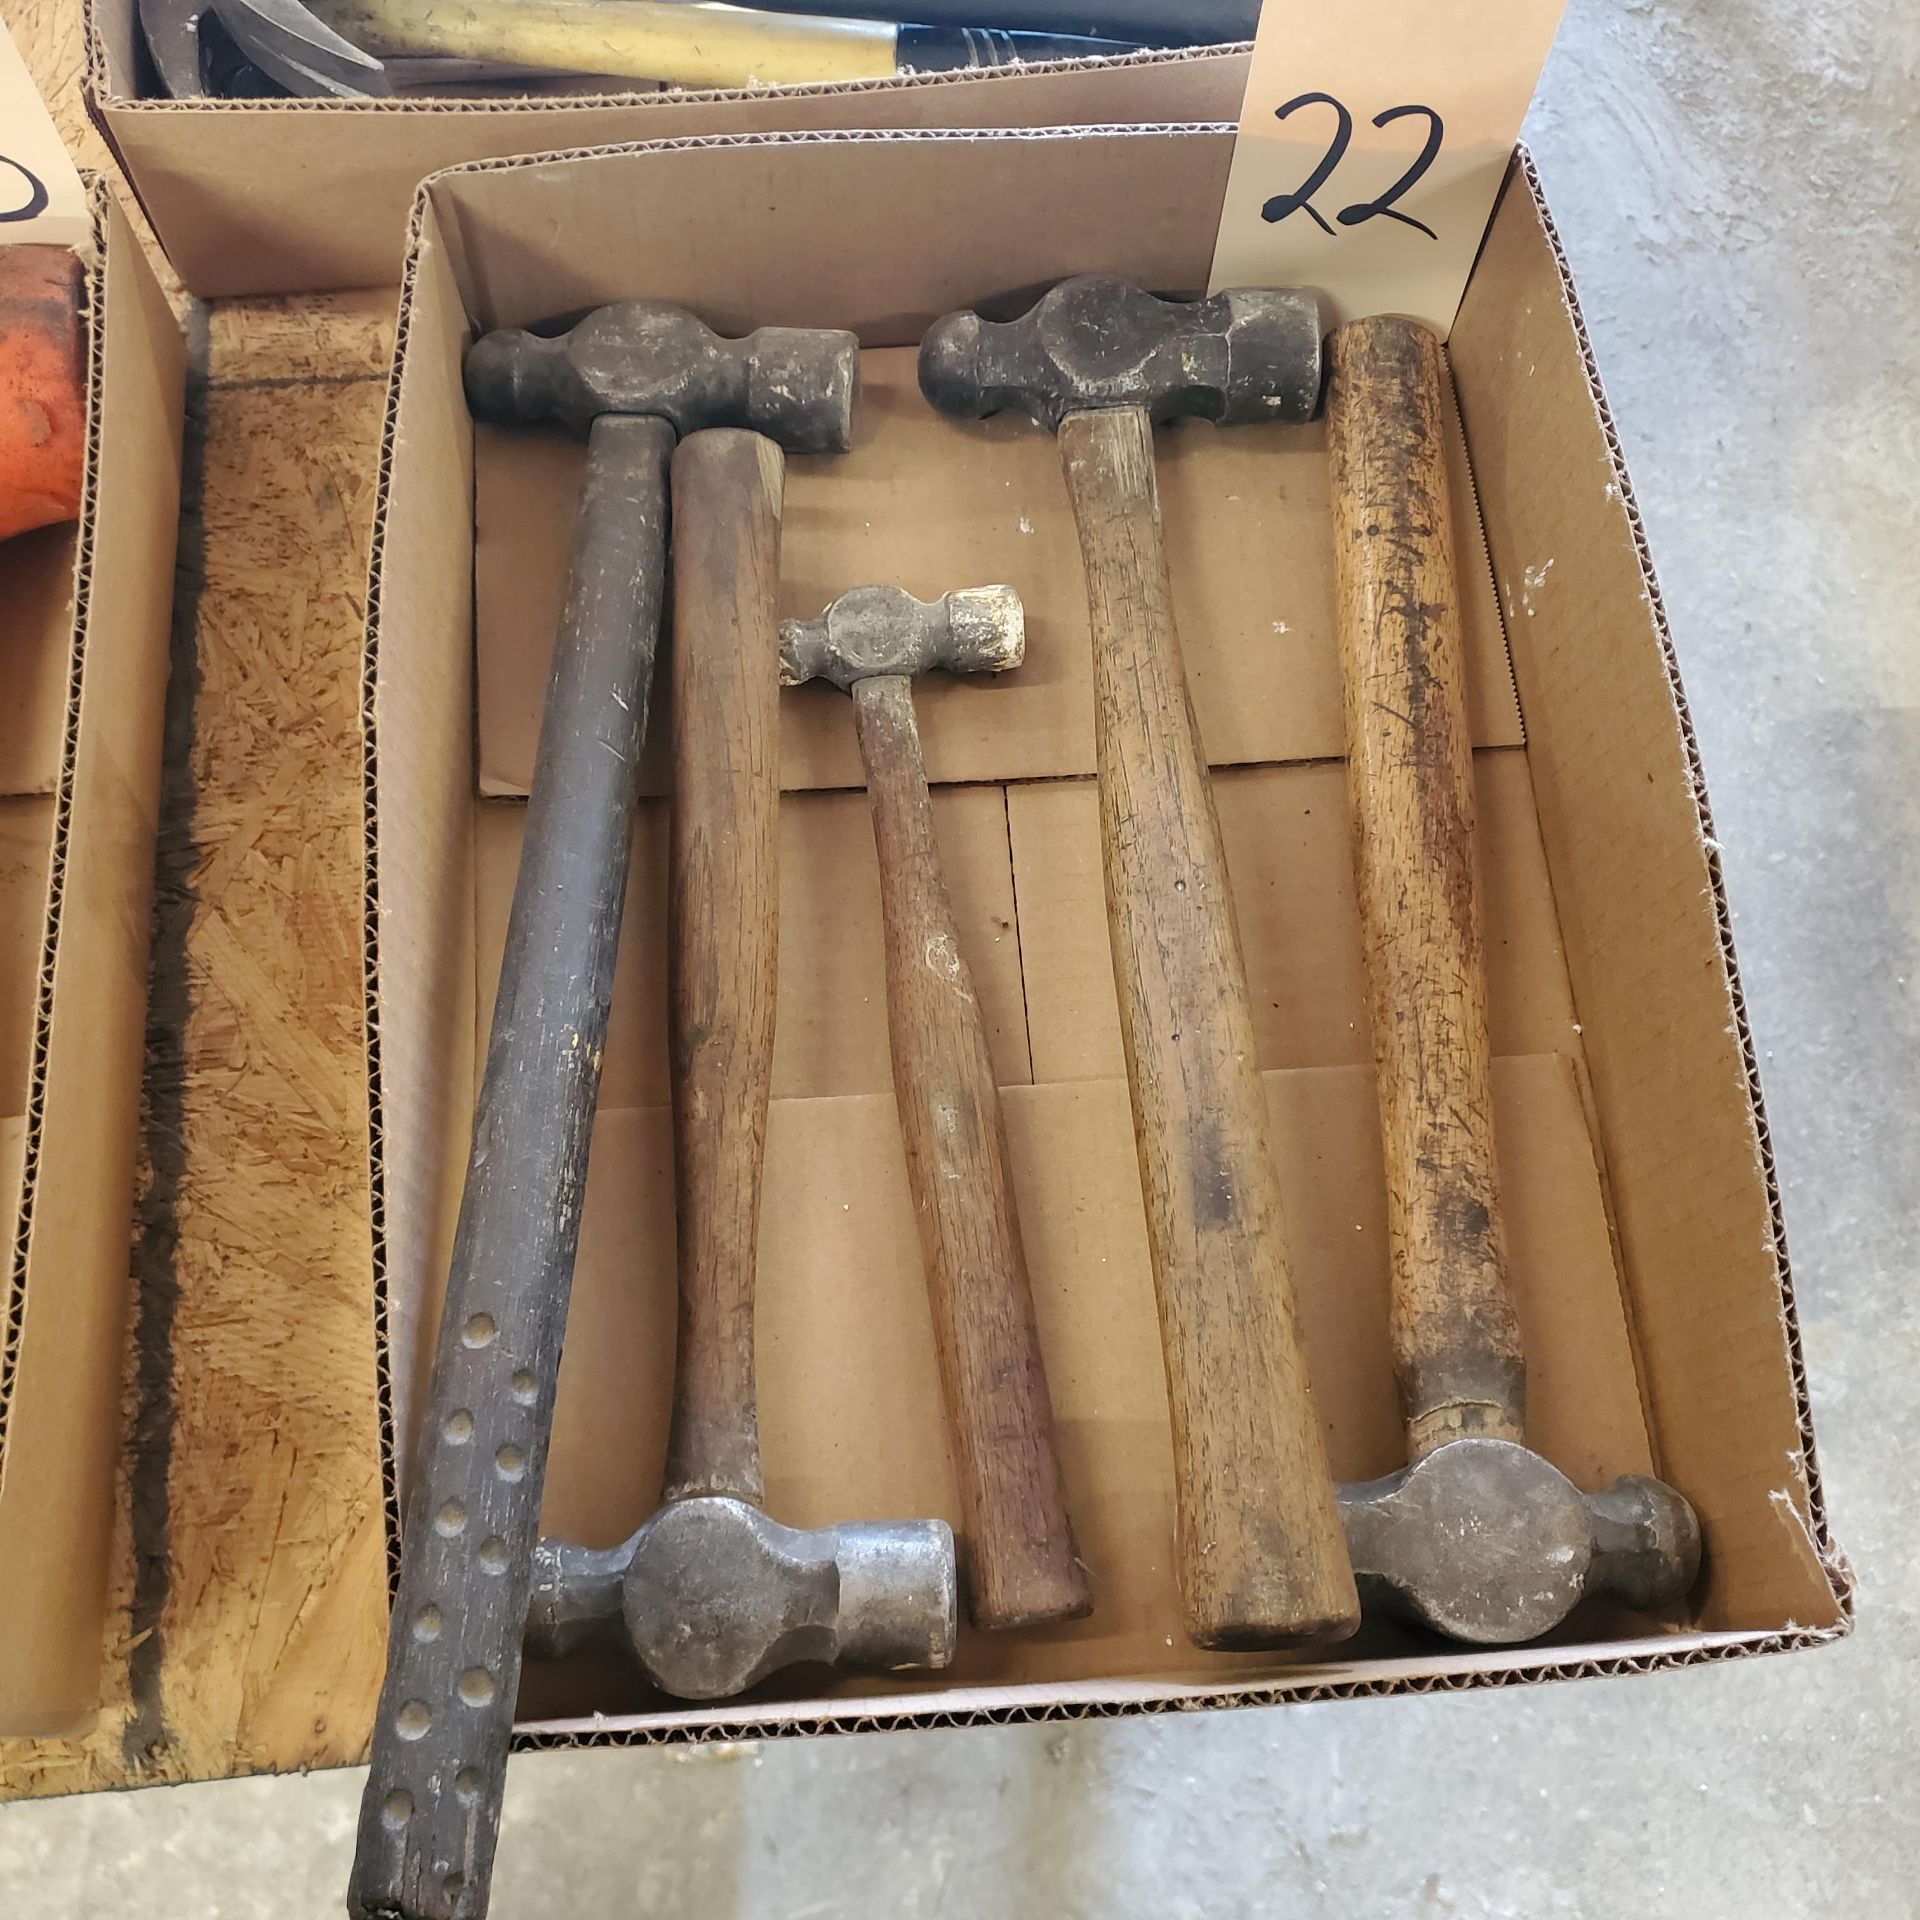 Lot of Assorted Ball Peen Hammers